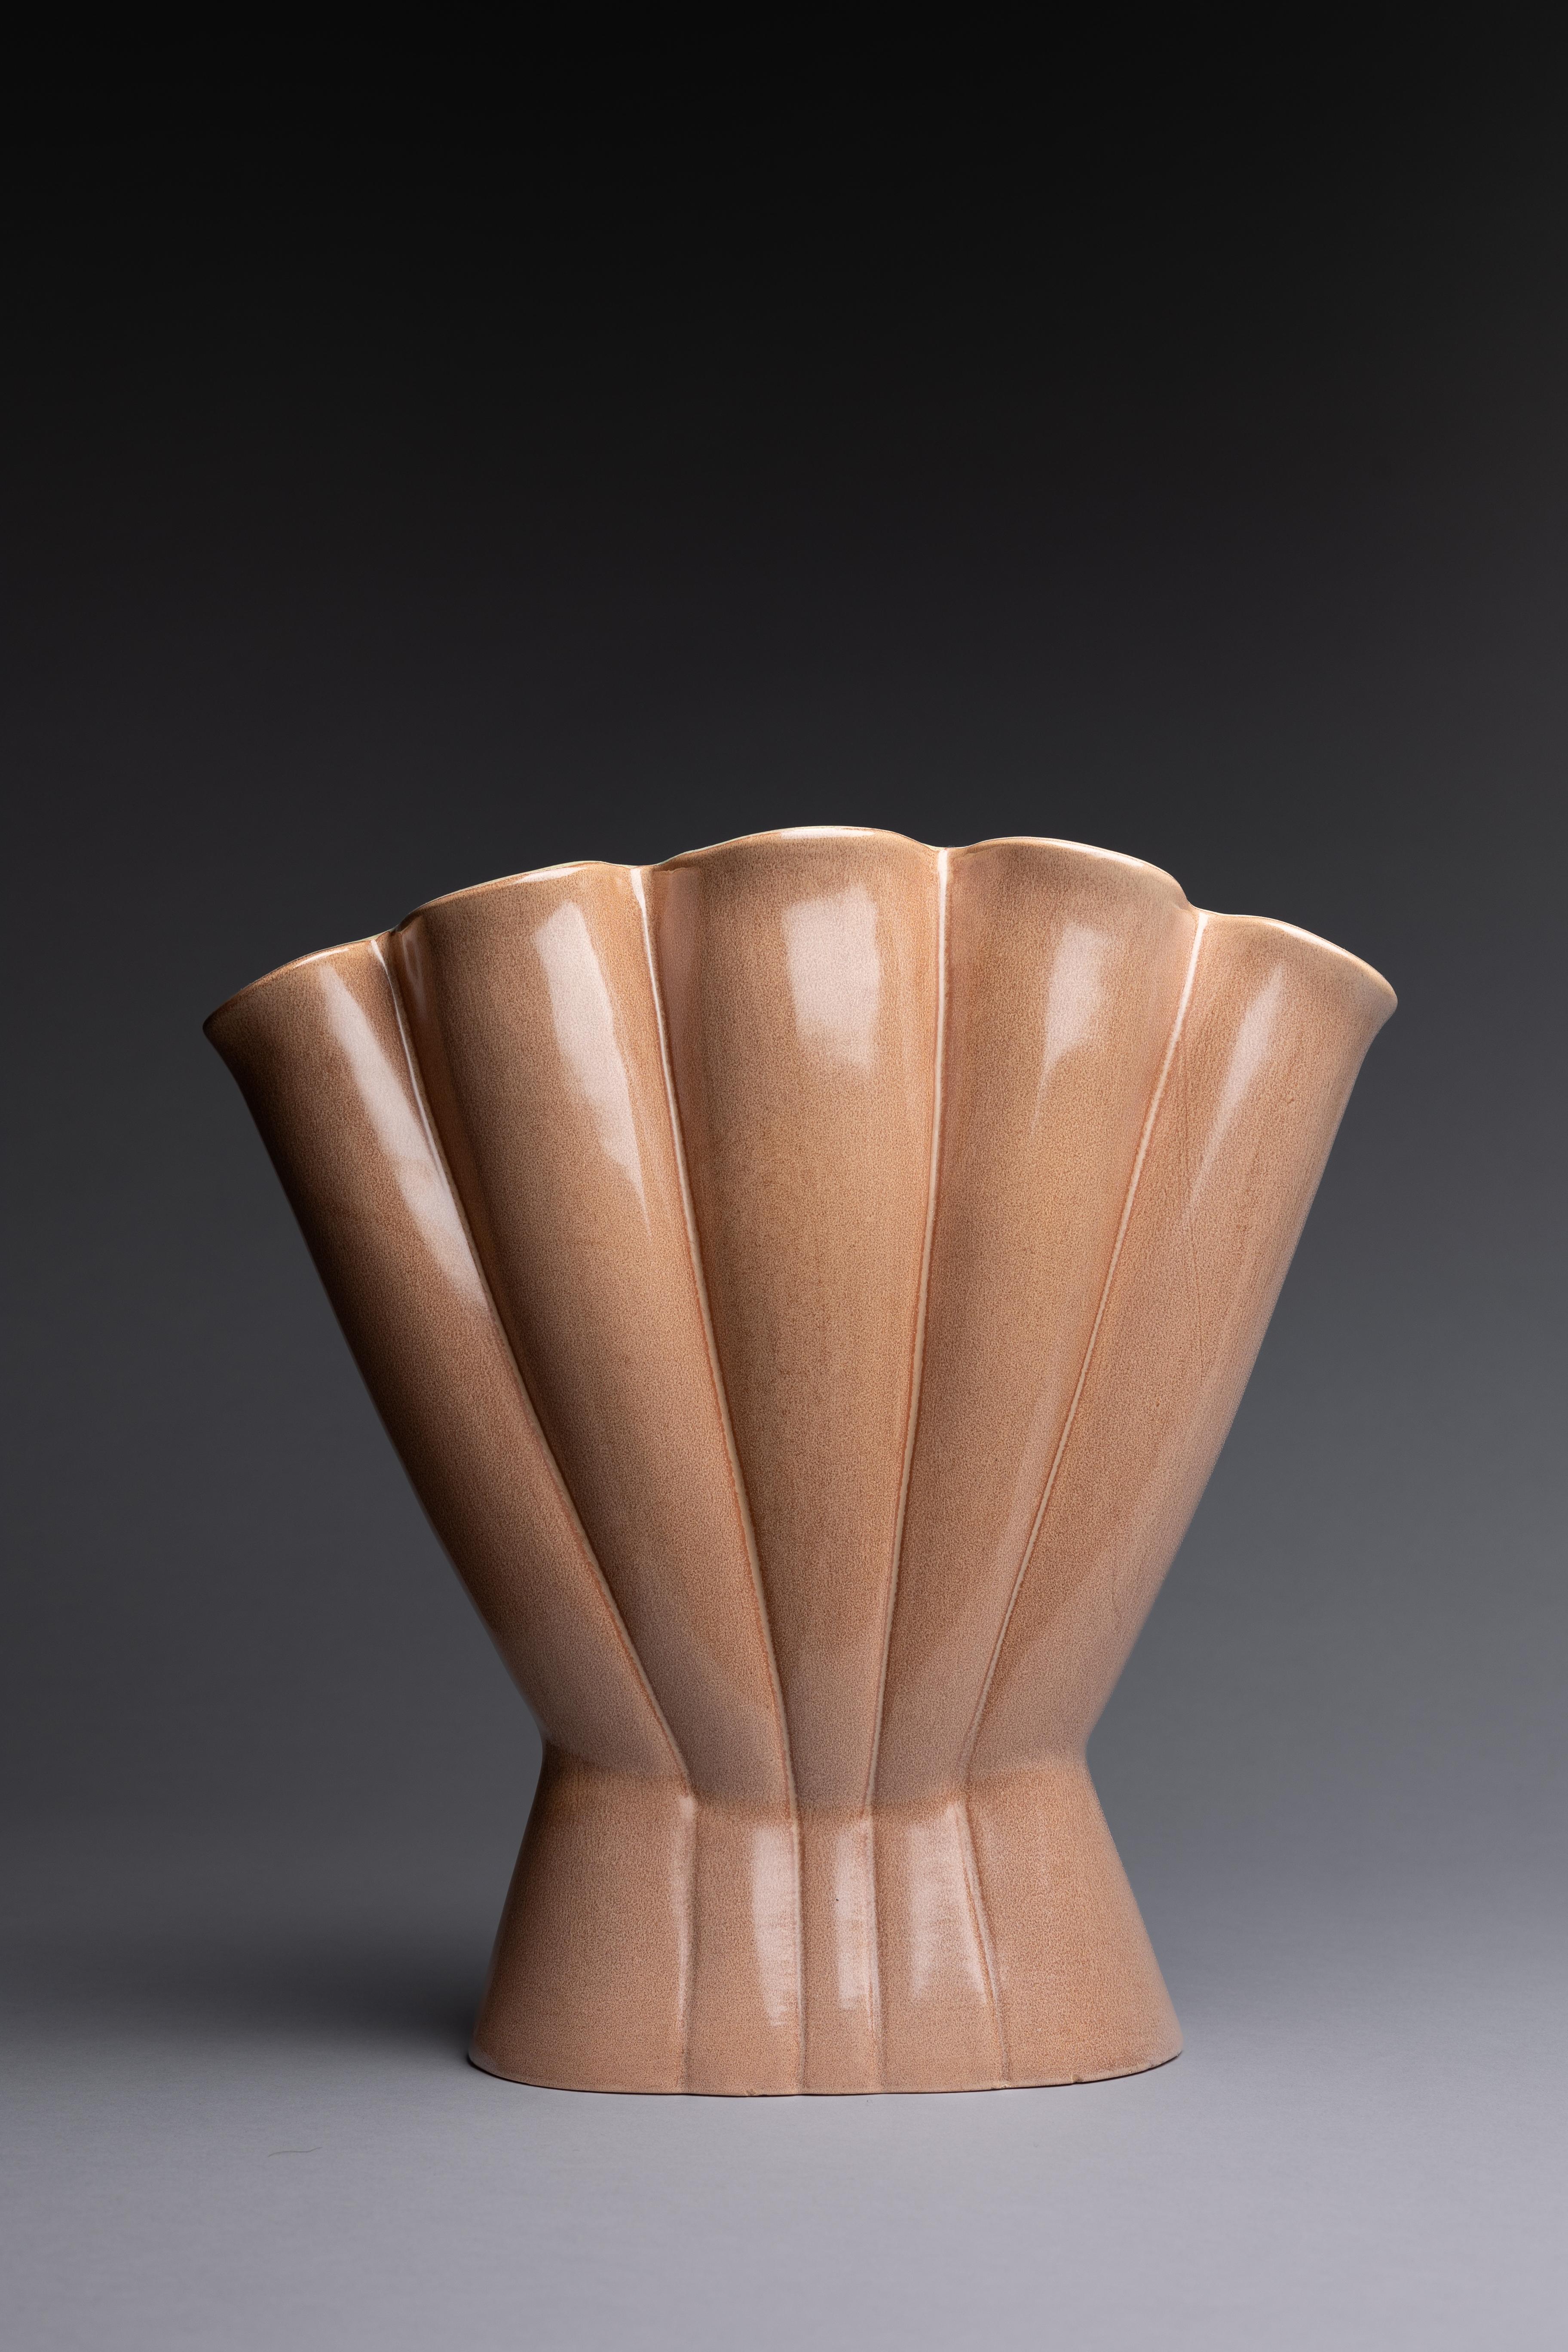 A Red Wing Potteries light pink vase, made circa 1950.

In the years after World War II, Western makers approached their designs with a spirit of optimism and dynamism. The mid-century modern style was a result of that energy, incorporating